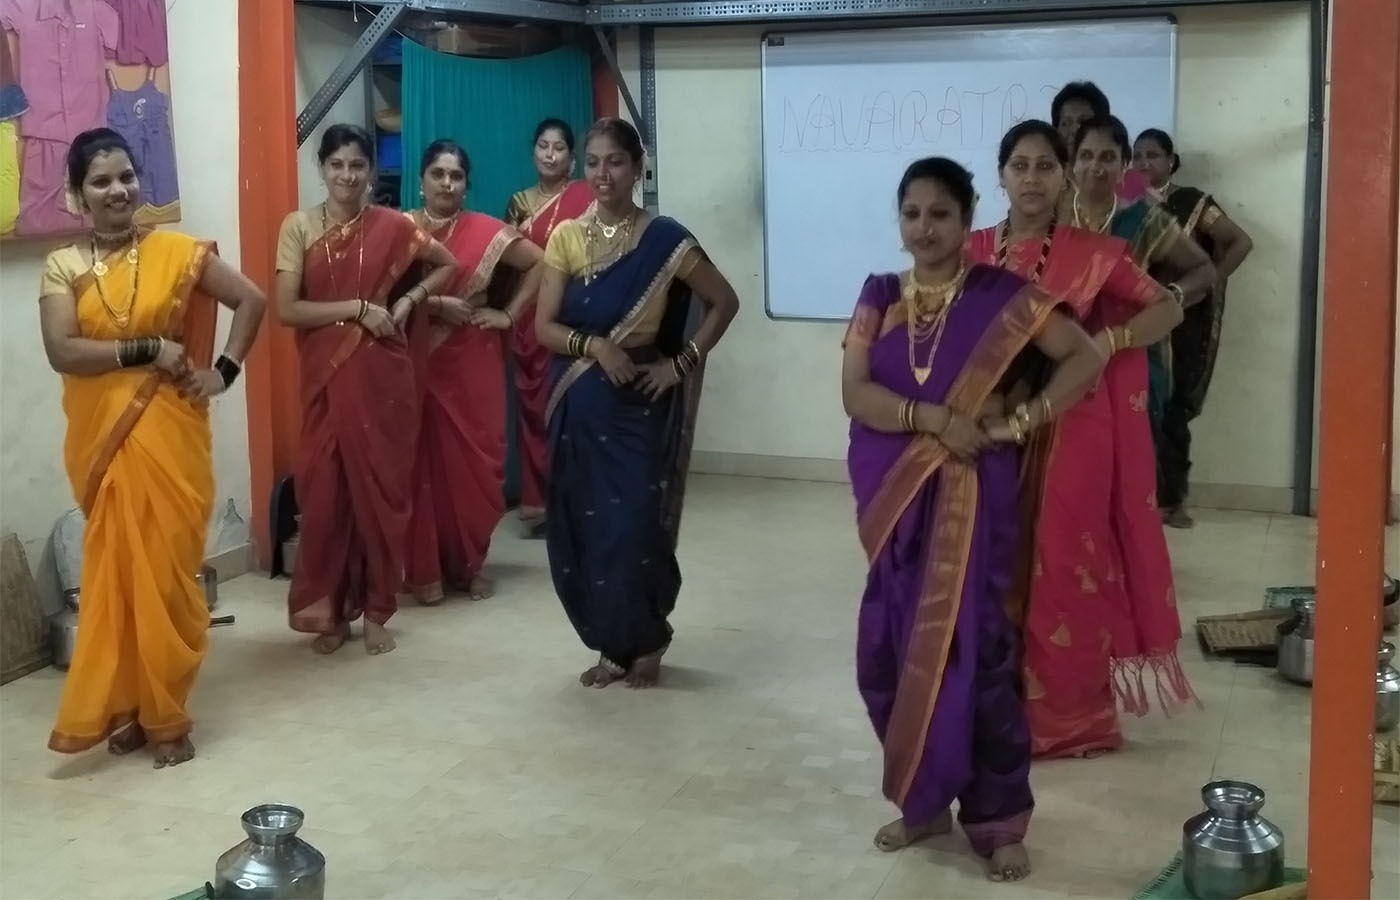 Mangala Gaur dance performed by the students with amazing coordination